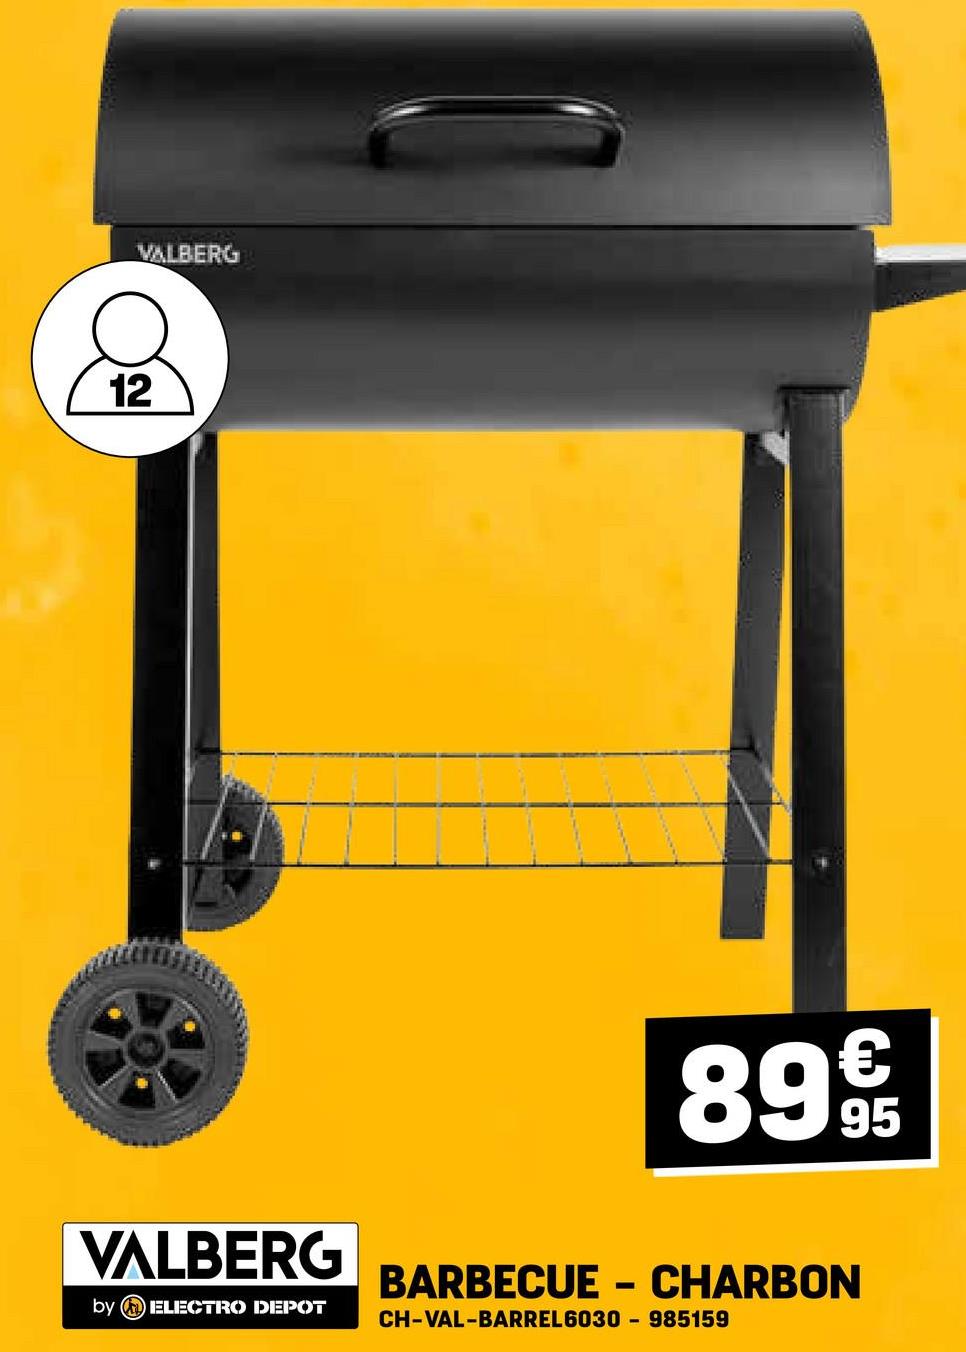 12
VALBERG
VALBERG
by ELECTRO DEPOT
8995
BARBECUE - CHARBON
CH-VAL-BARREL 6030 - 985159